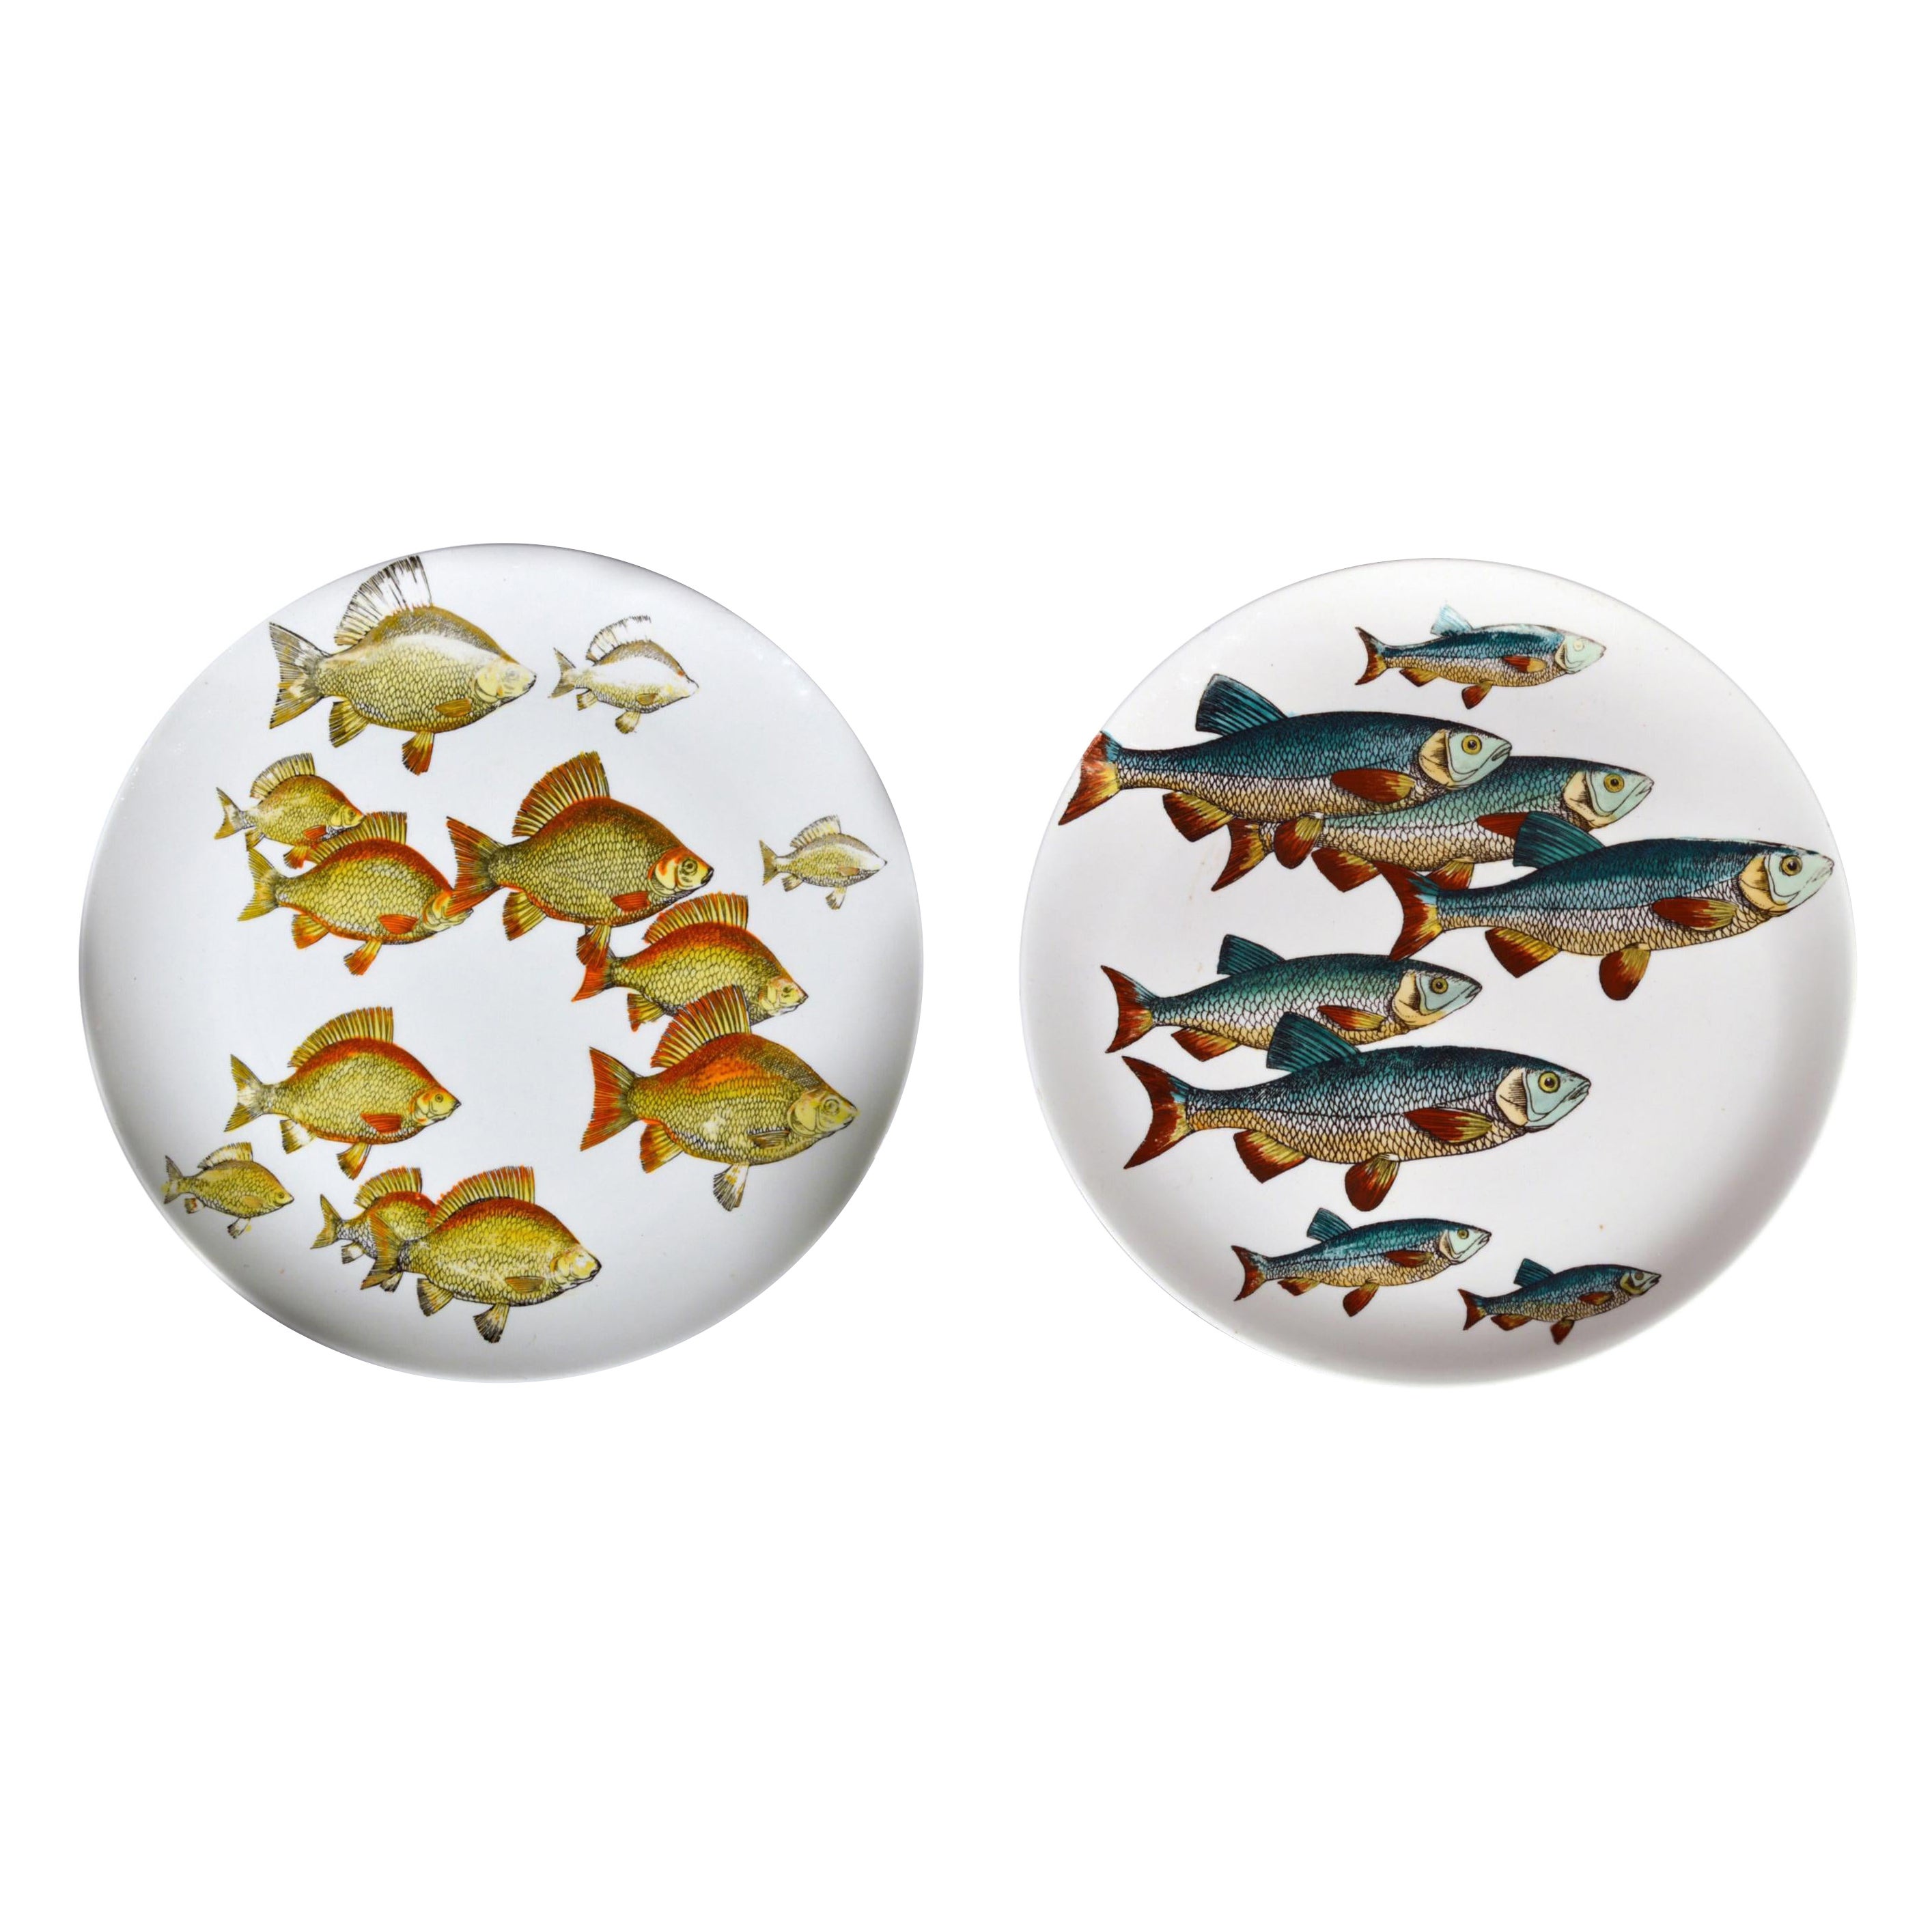 Piero Fornasetti Porcelain Fish Plates, Pesci pattern or Passage of Fish For Sale